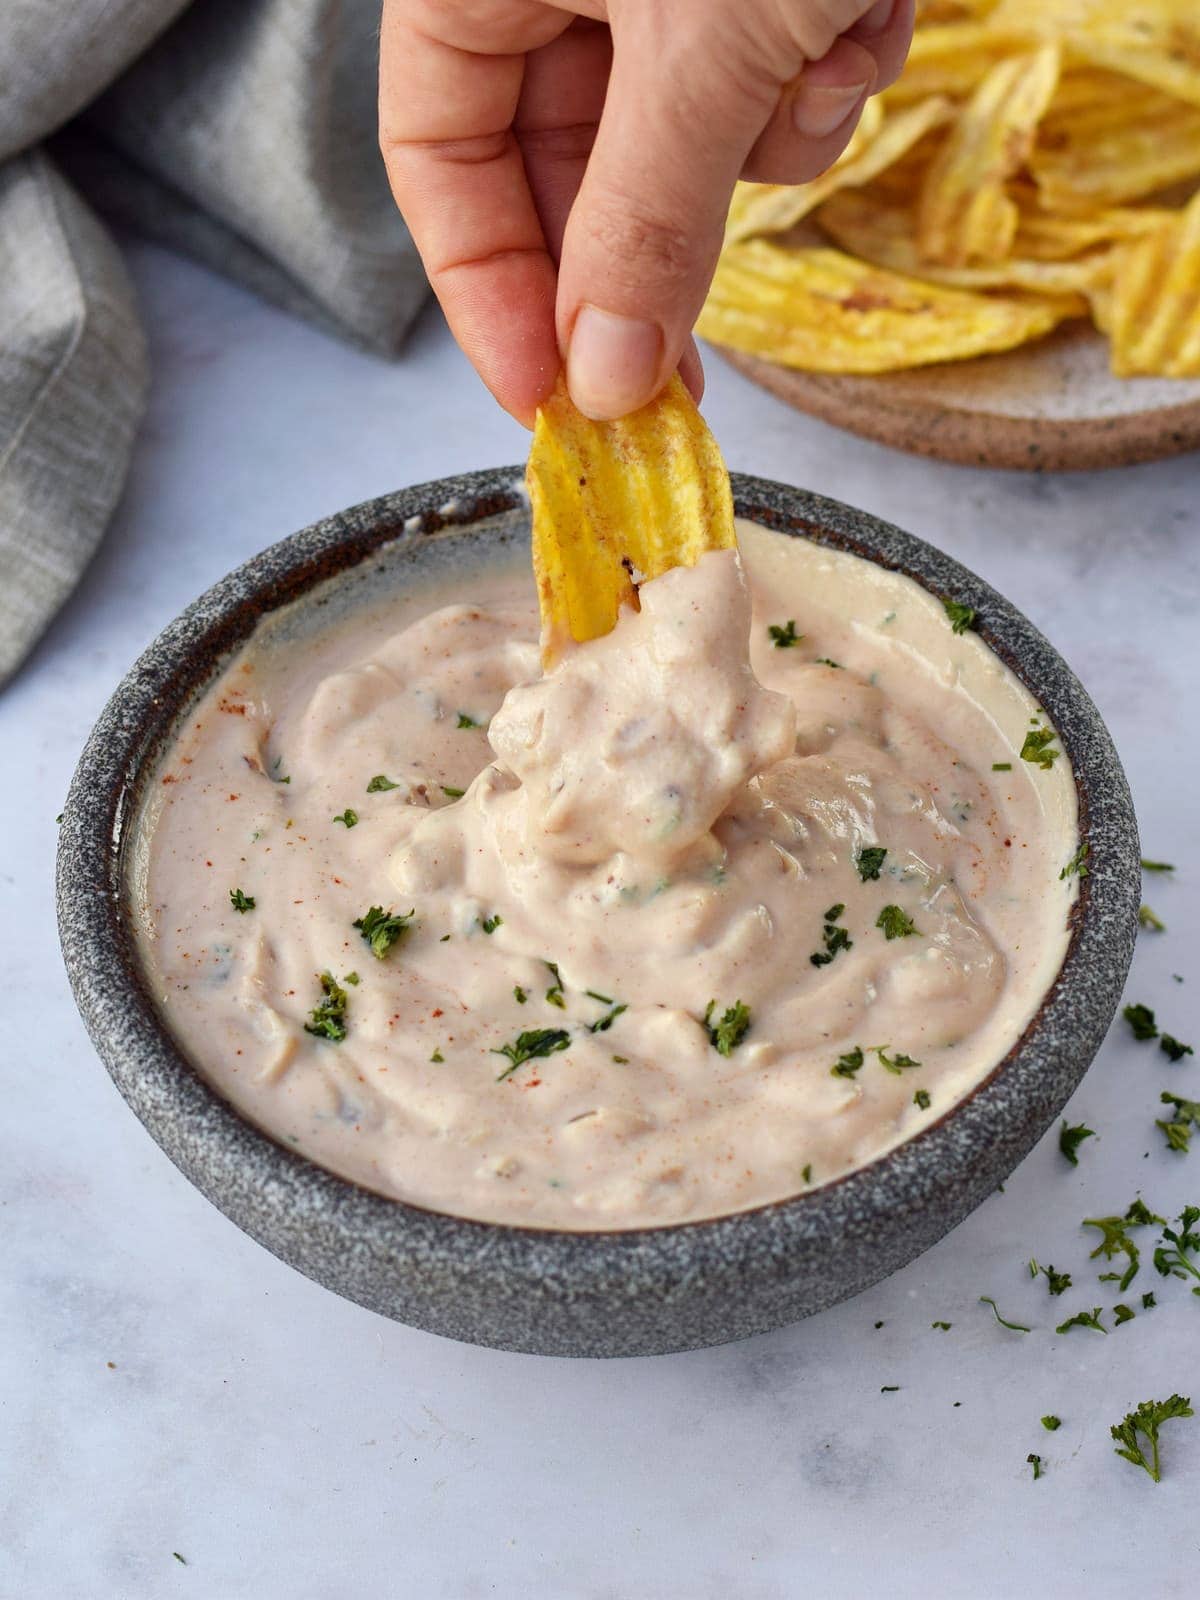 Hand holding chip submerged in vegan French onion dip in bowl